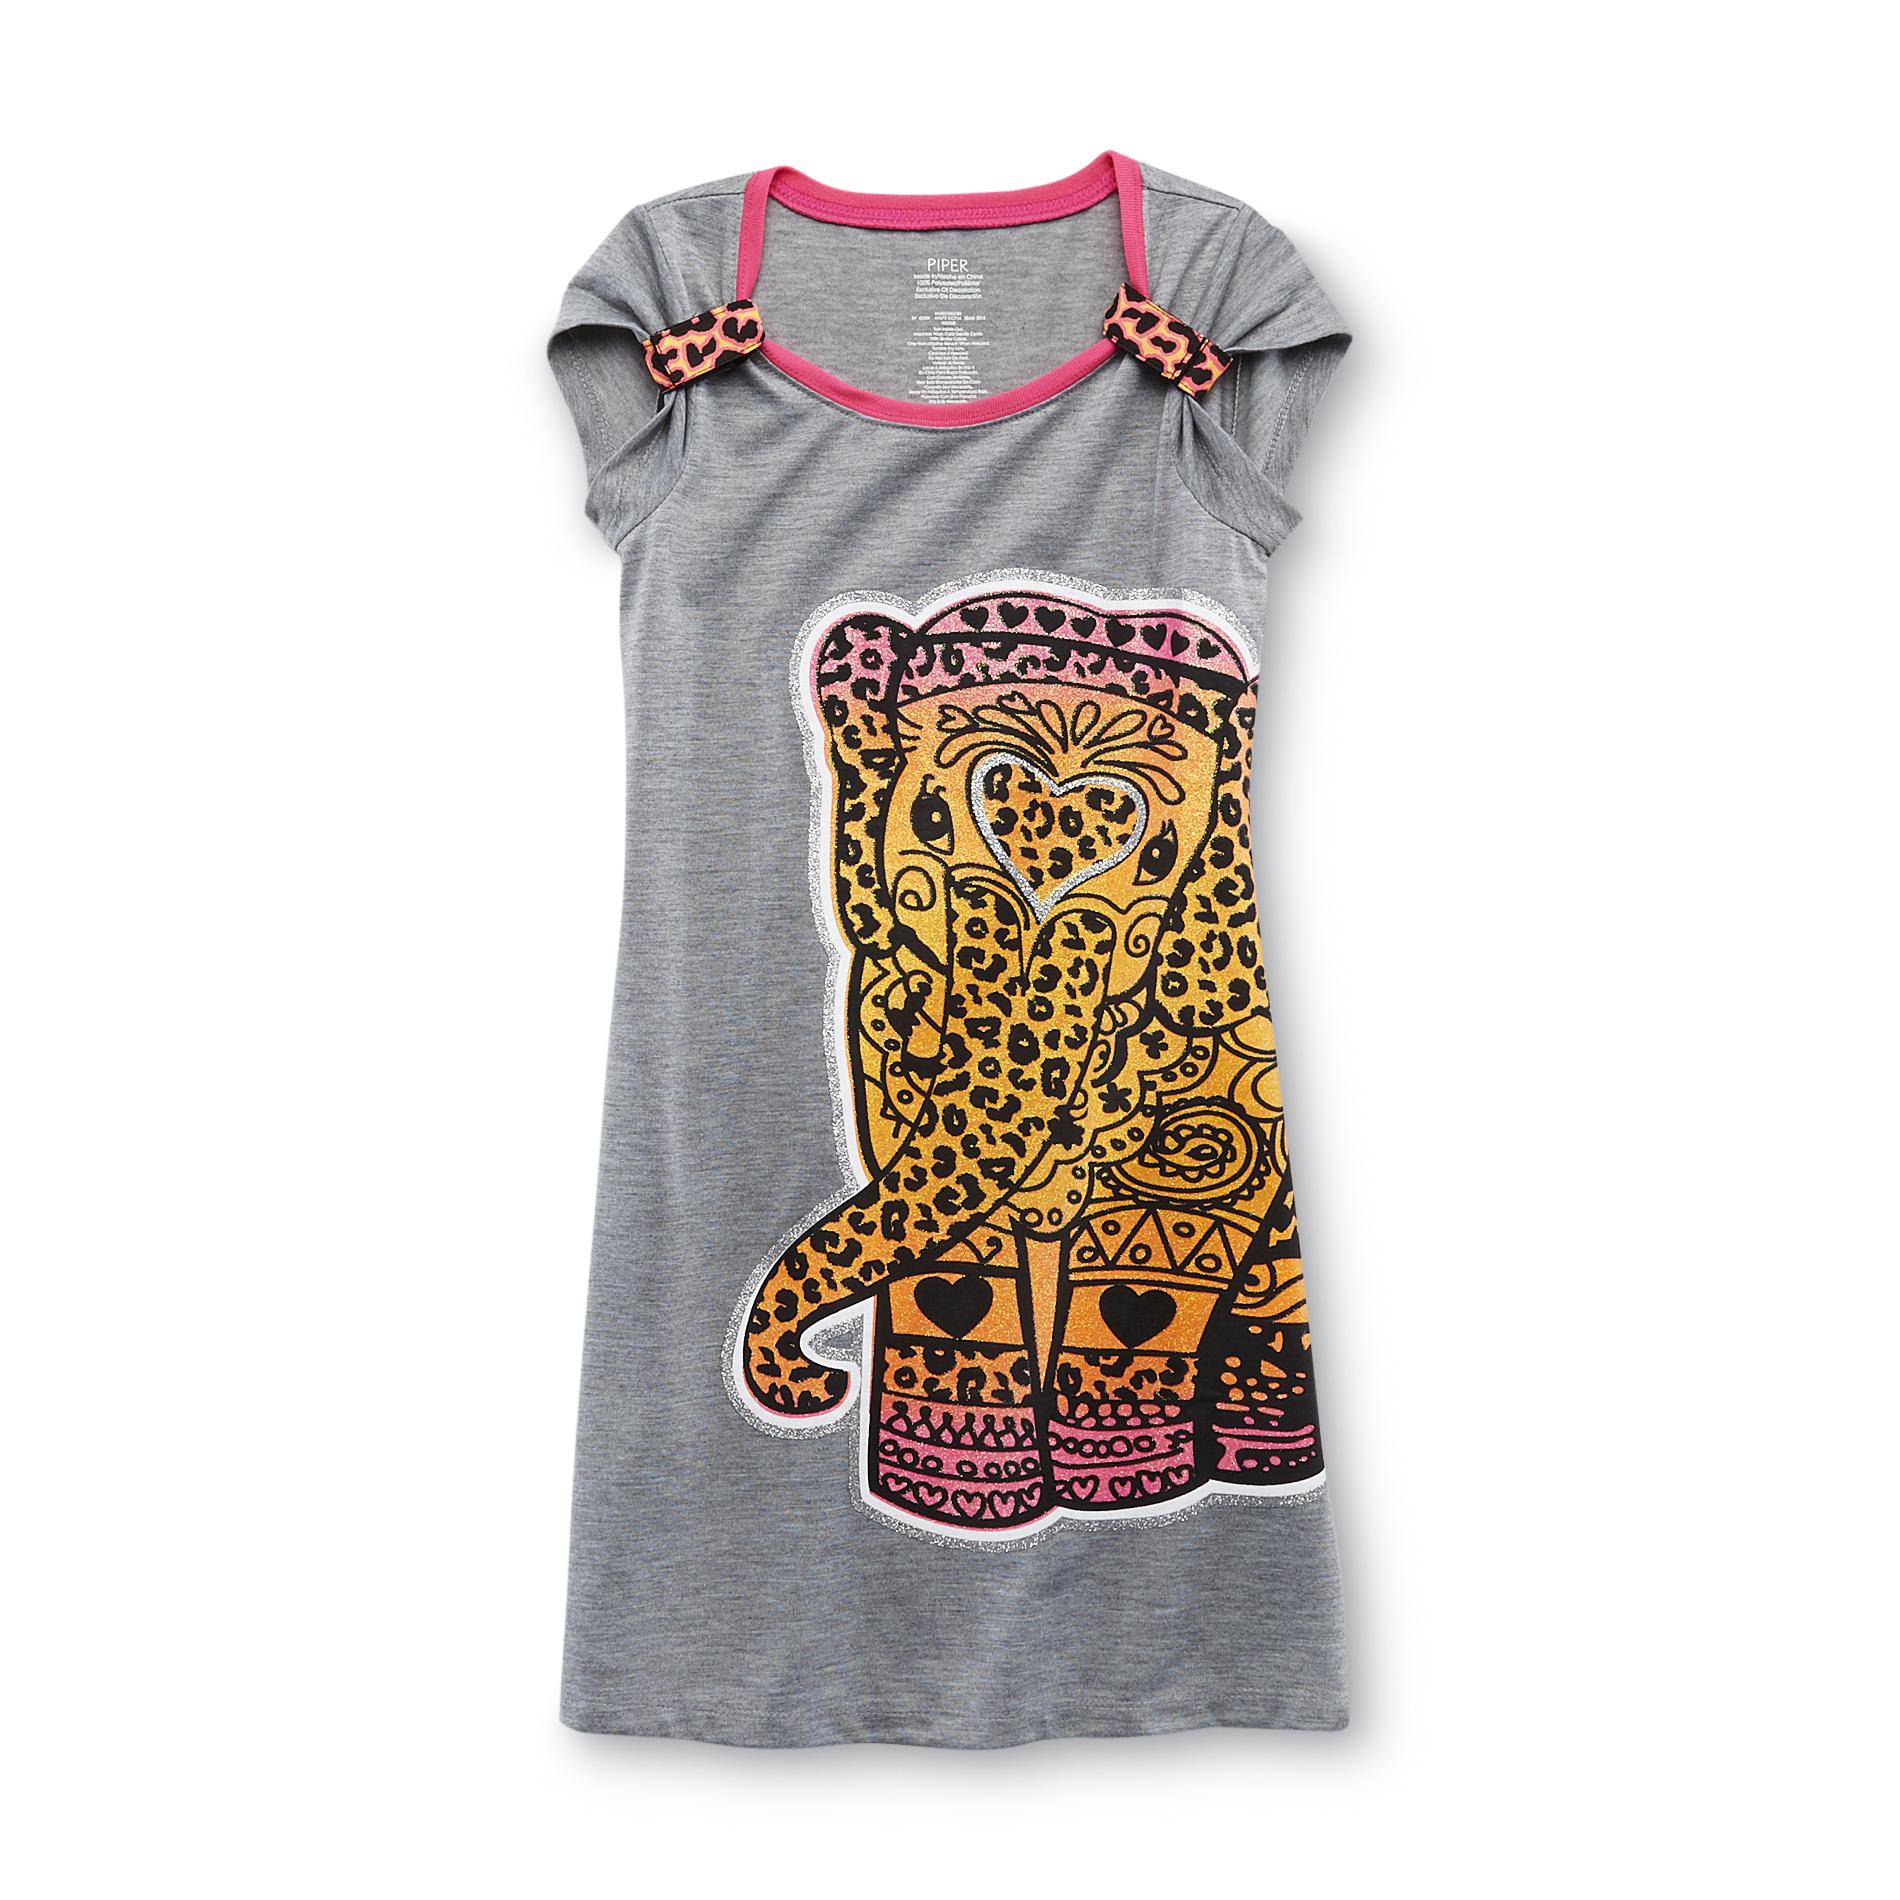 Piper Girl's Nightgown - Neon Elephant